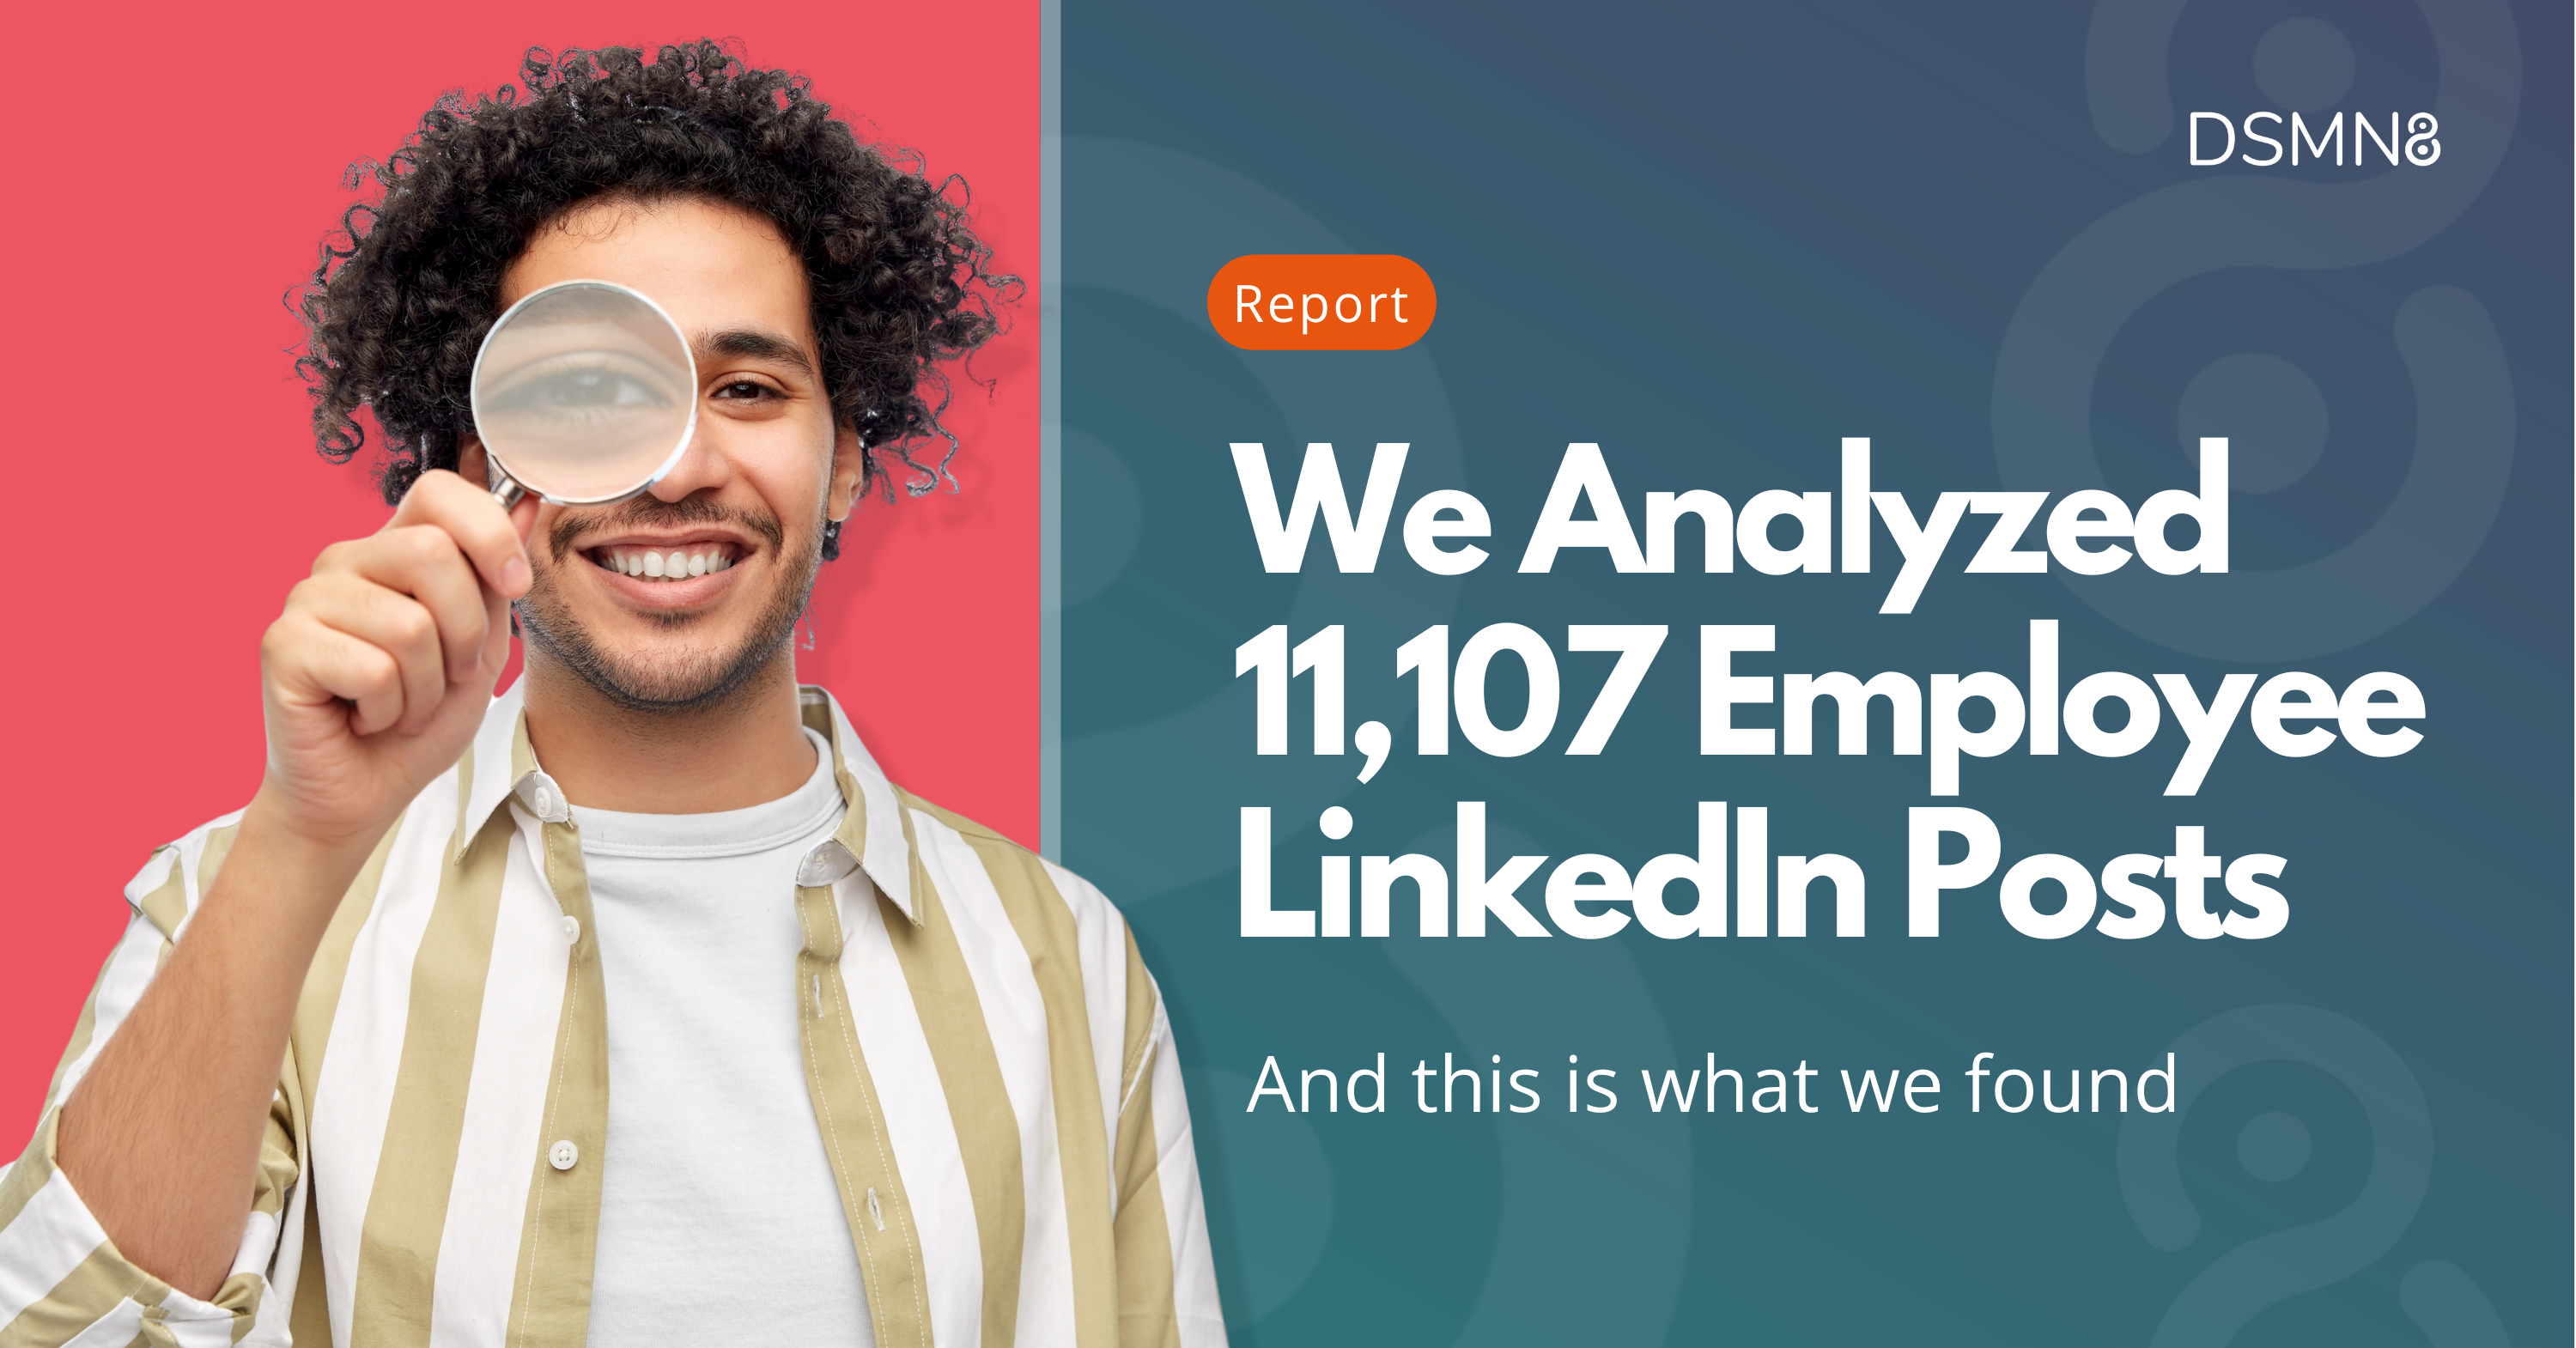 we analyzed 11,107 employee LinkedIn posts and this is what we found